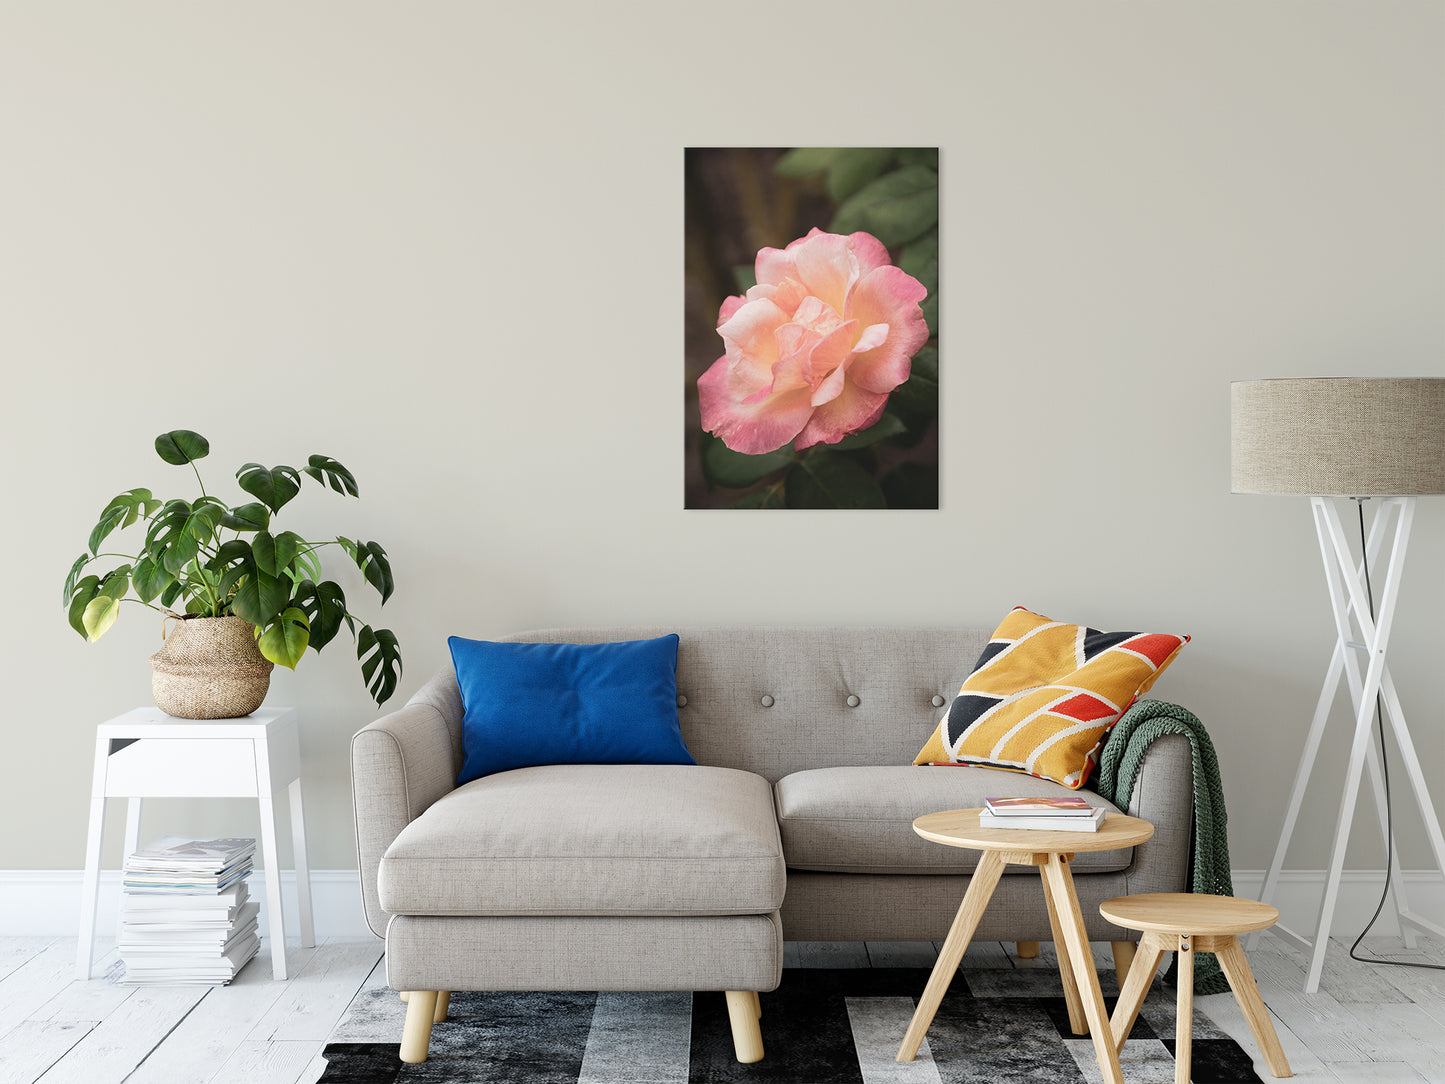 Pink and White Softened Rose Floral Nature Photo Fine Art Canvas Wall Art Prints 24" x 36" - PIPAFINEART